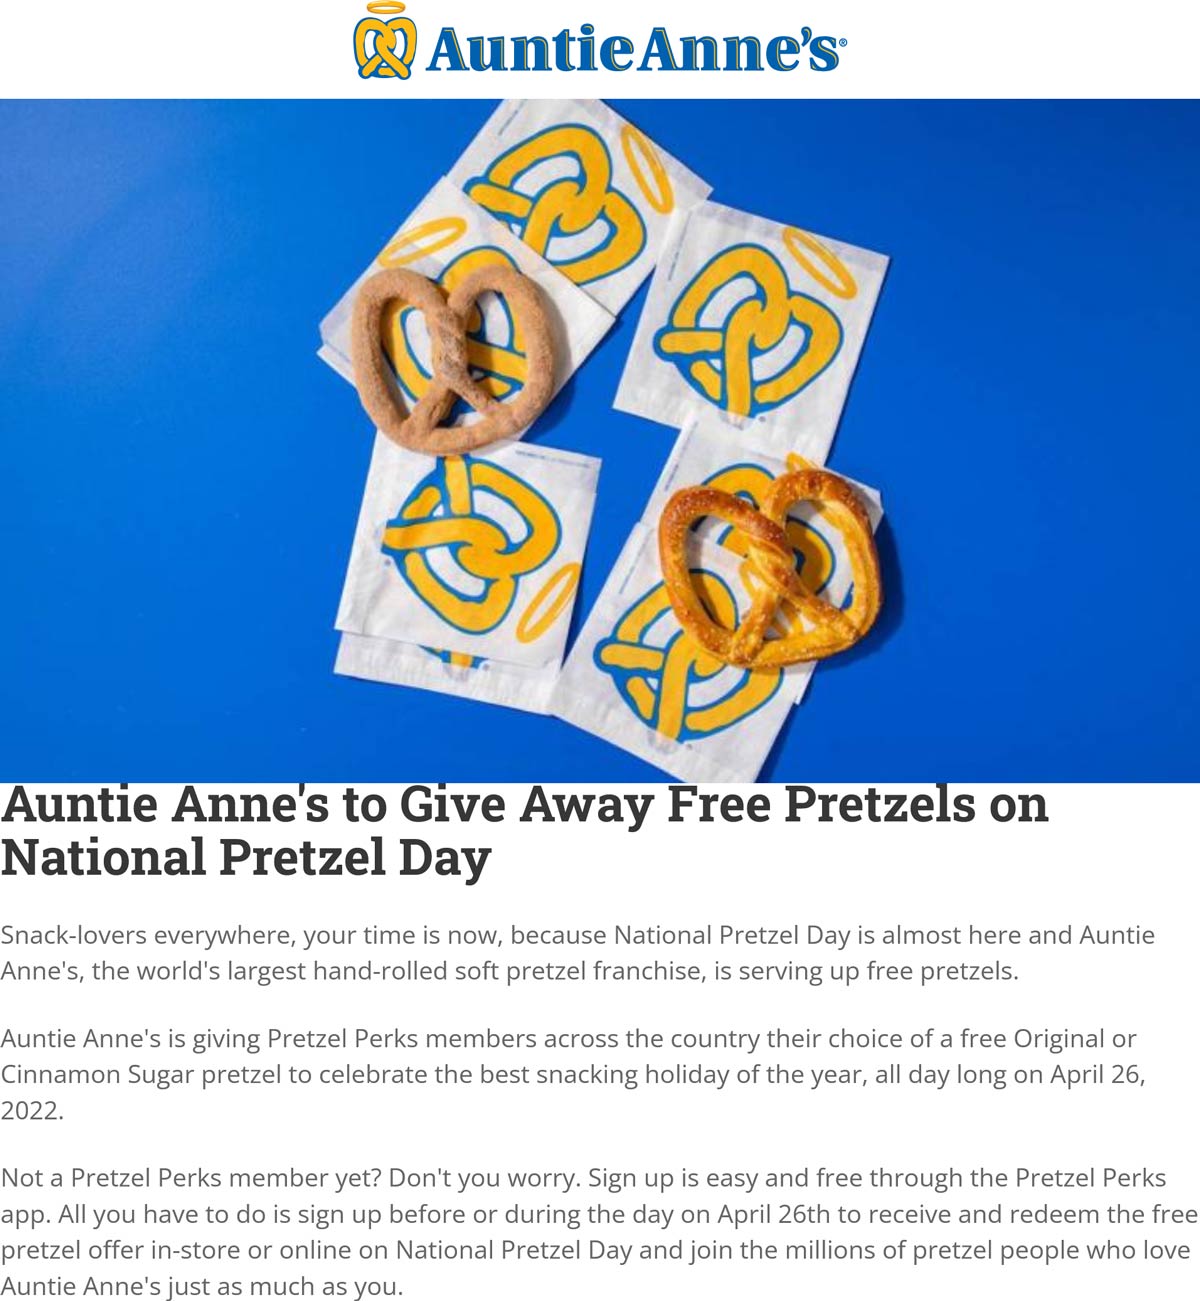 Auntie Annes coupons & promo code for [December 2022]